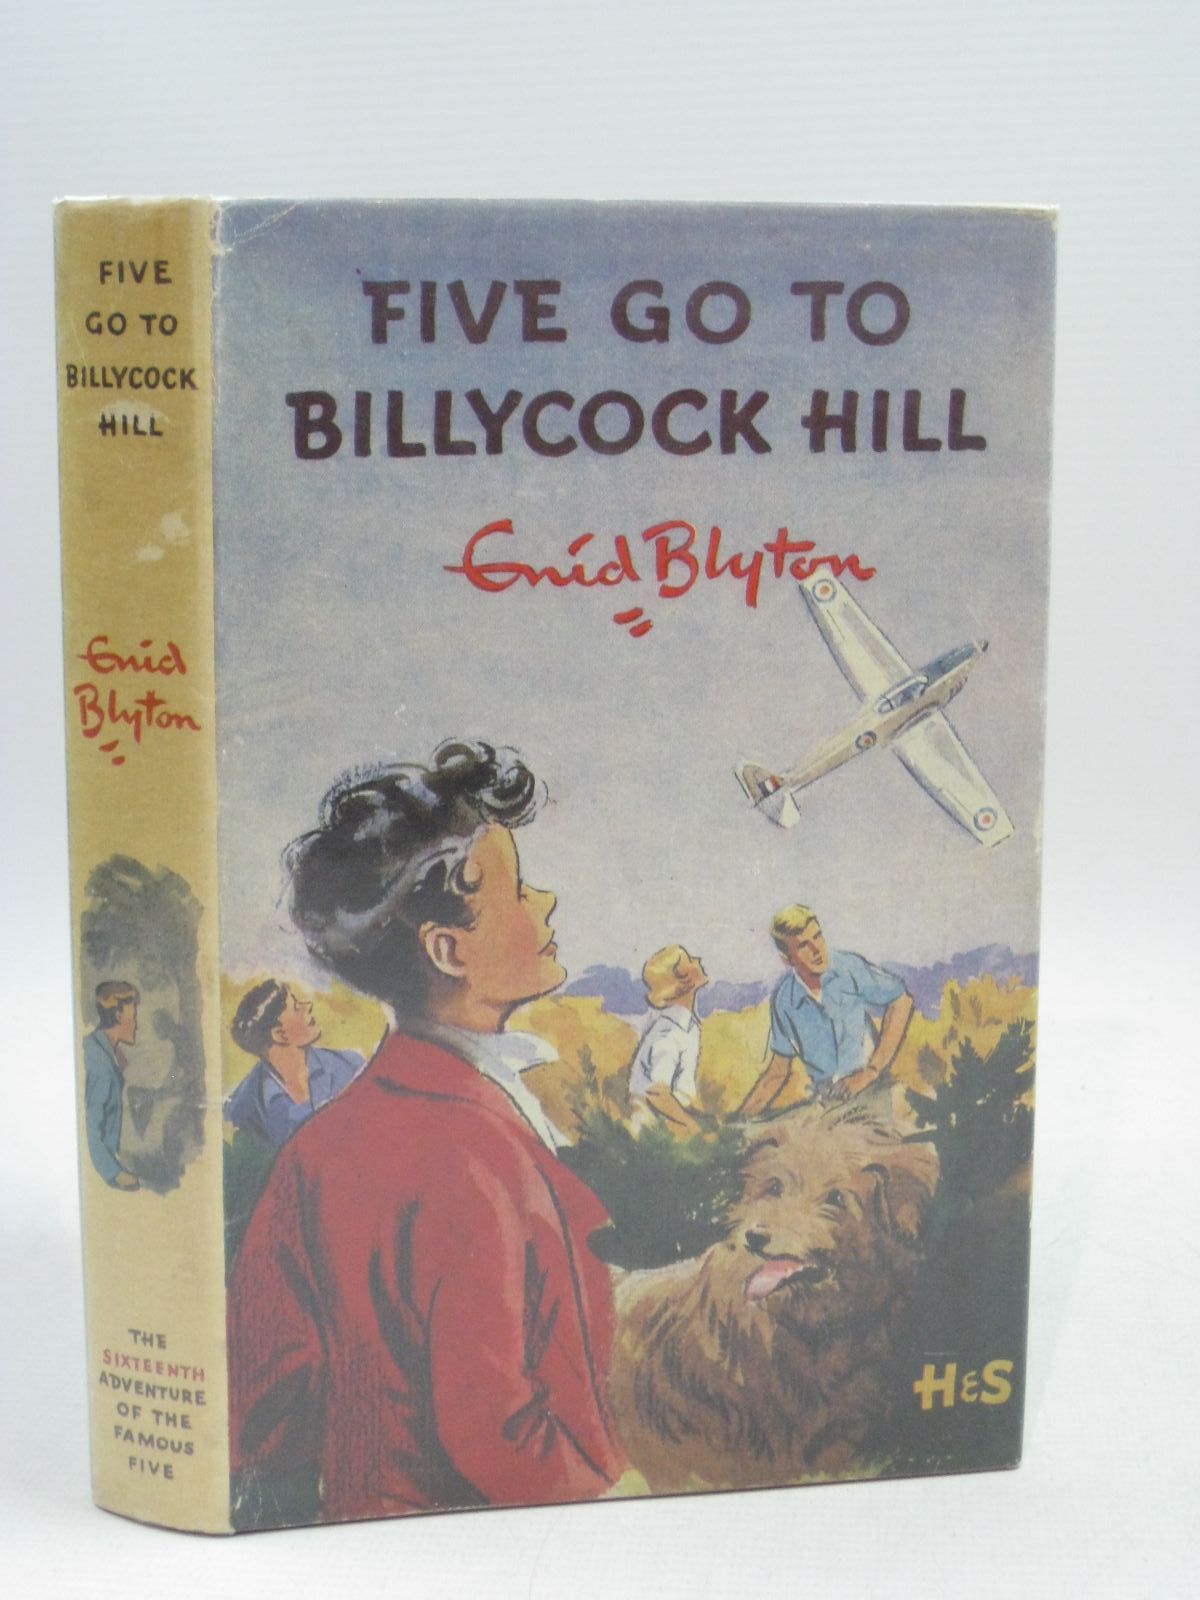 Cover of FIVE GO TO BILLYCOCK HILL by Enid Blyton